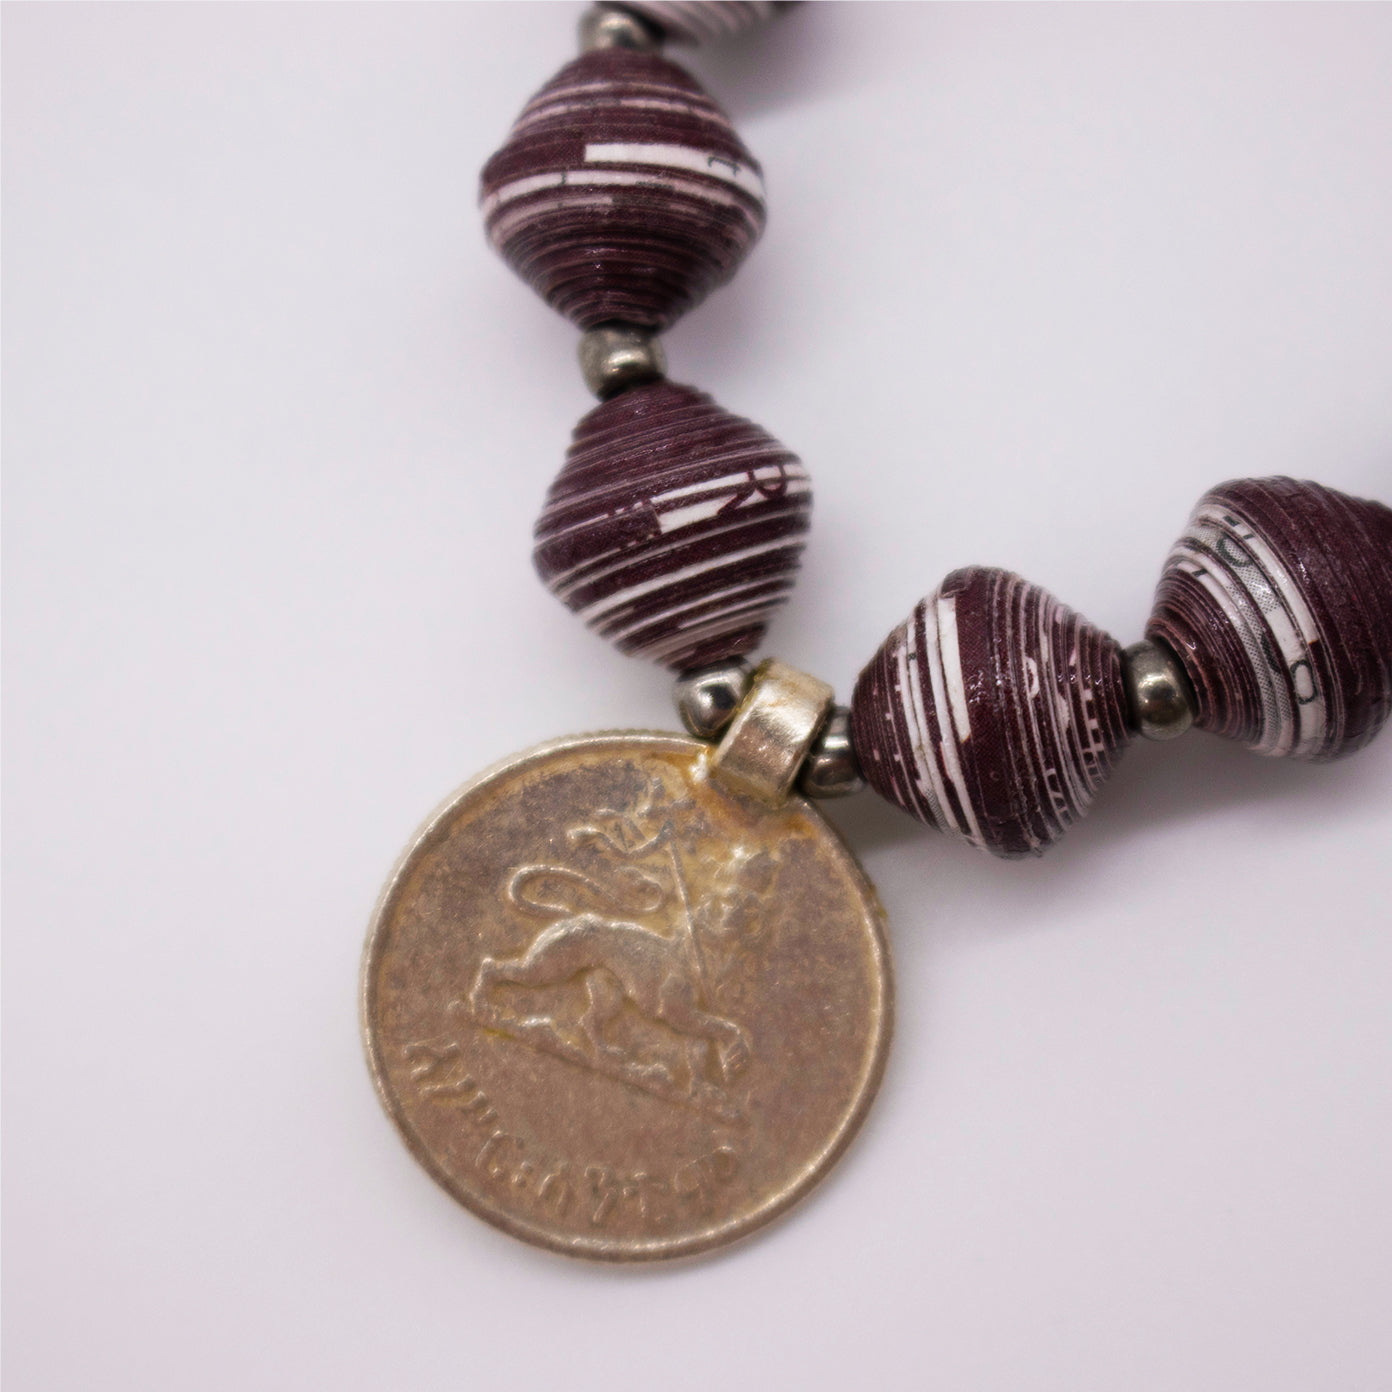 Upcycled Paper Bracelet with Coin